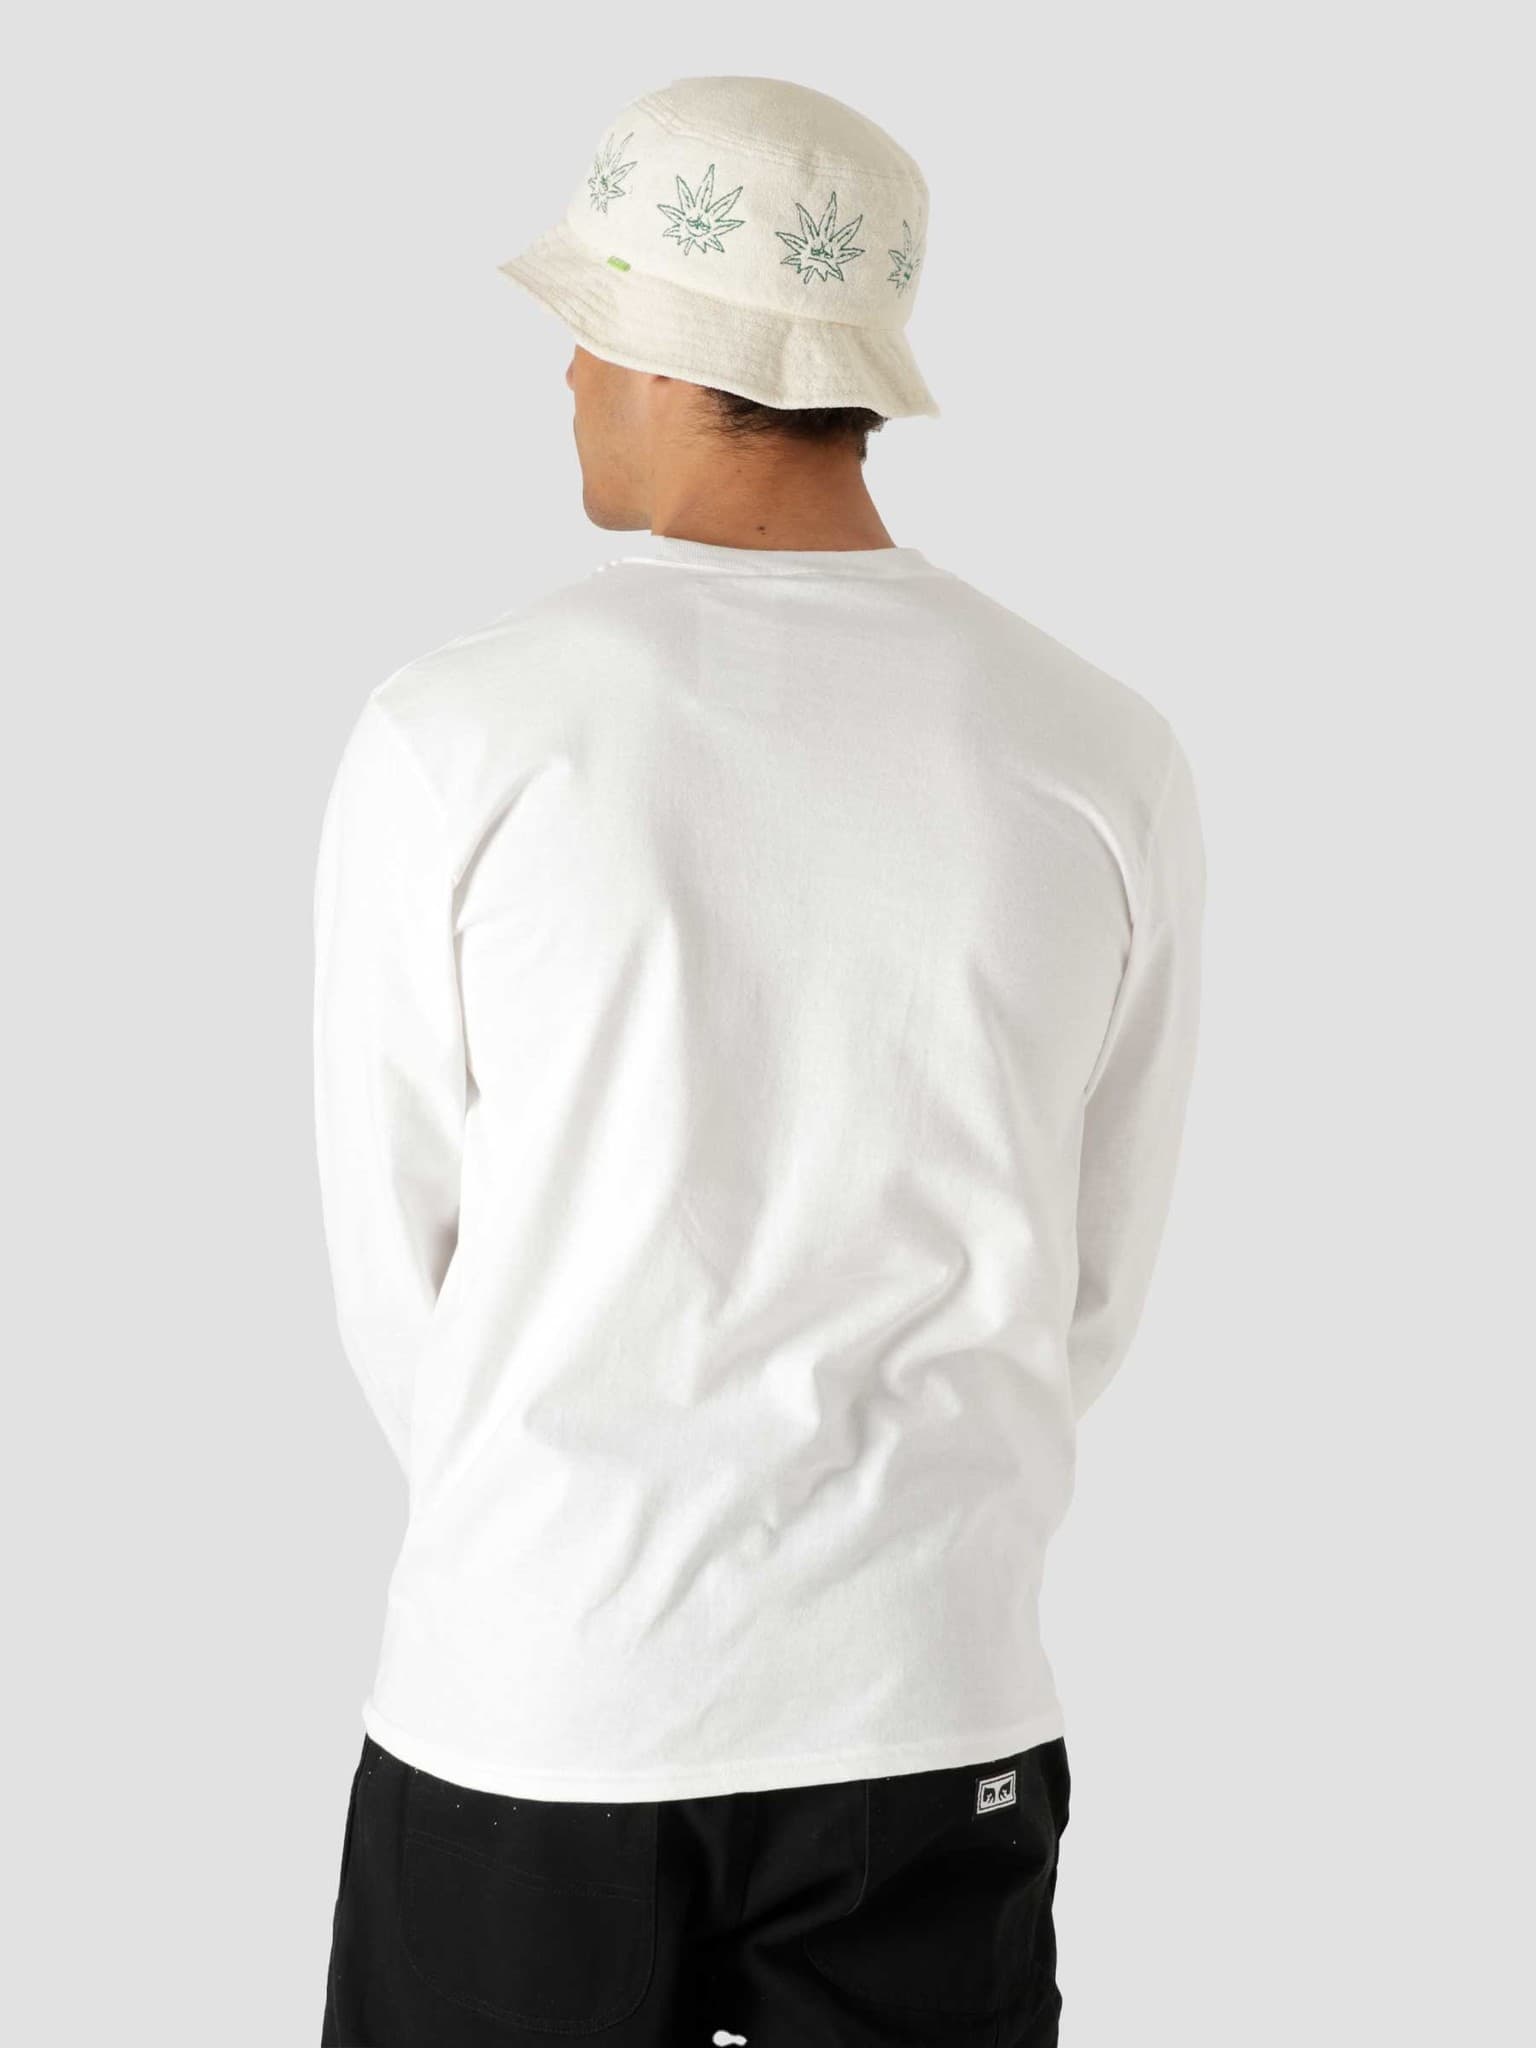 Day In The Life Longsleeve T-Shirt White TS01604